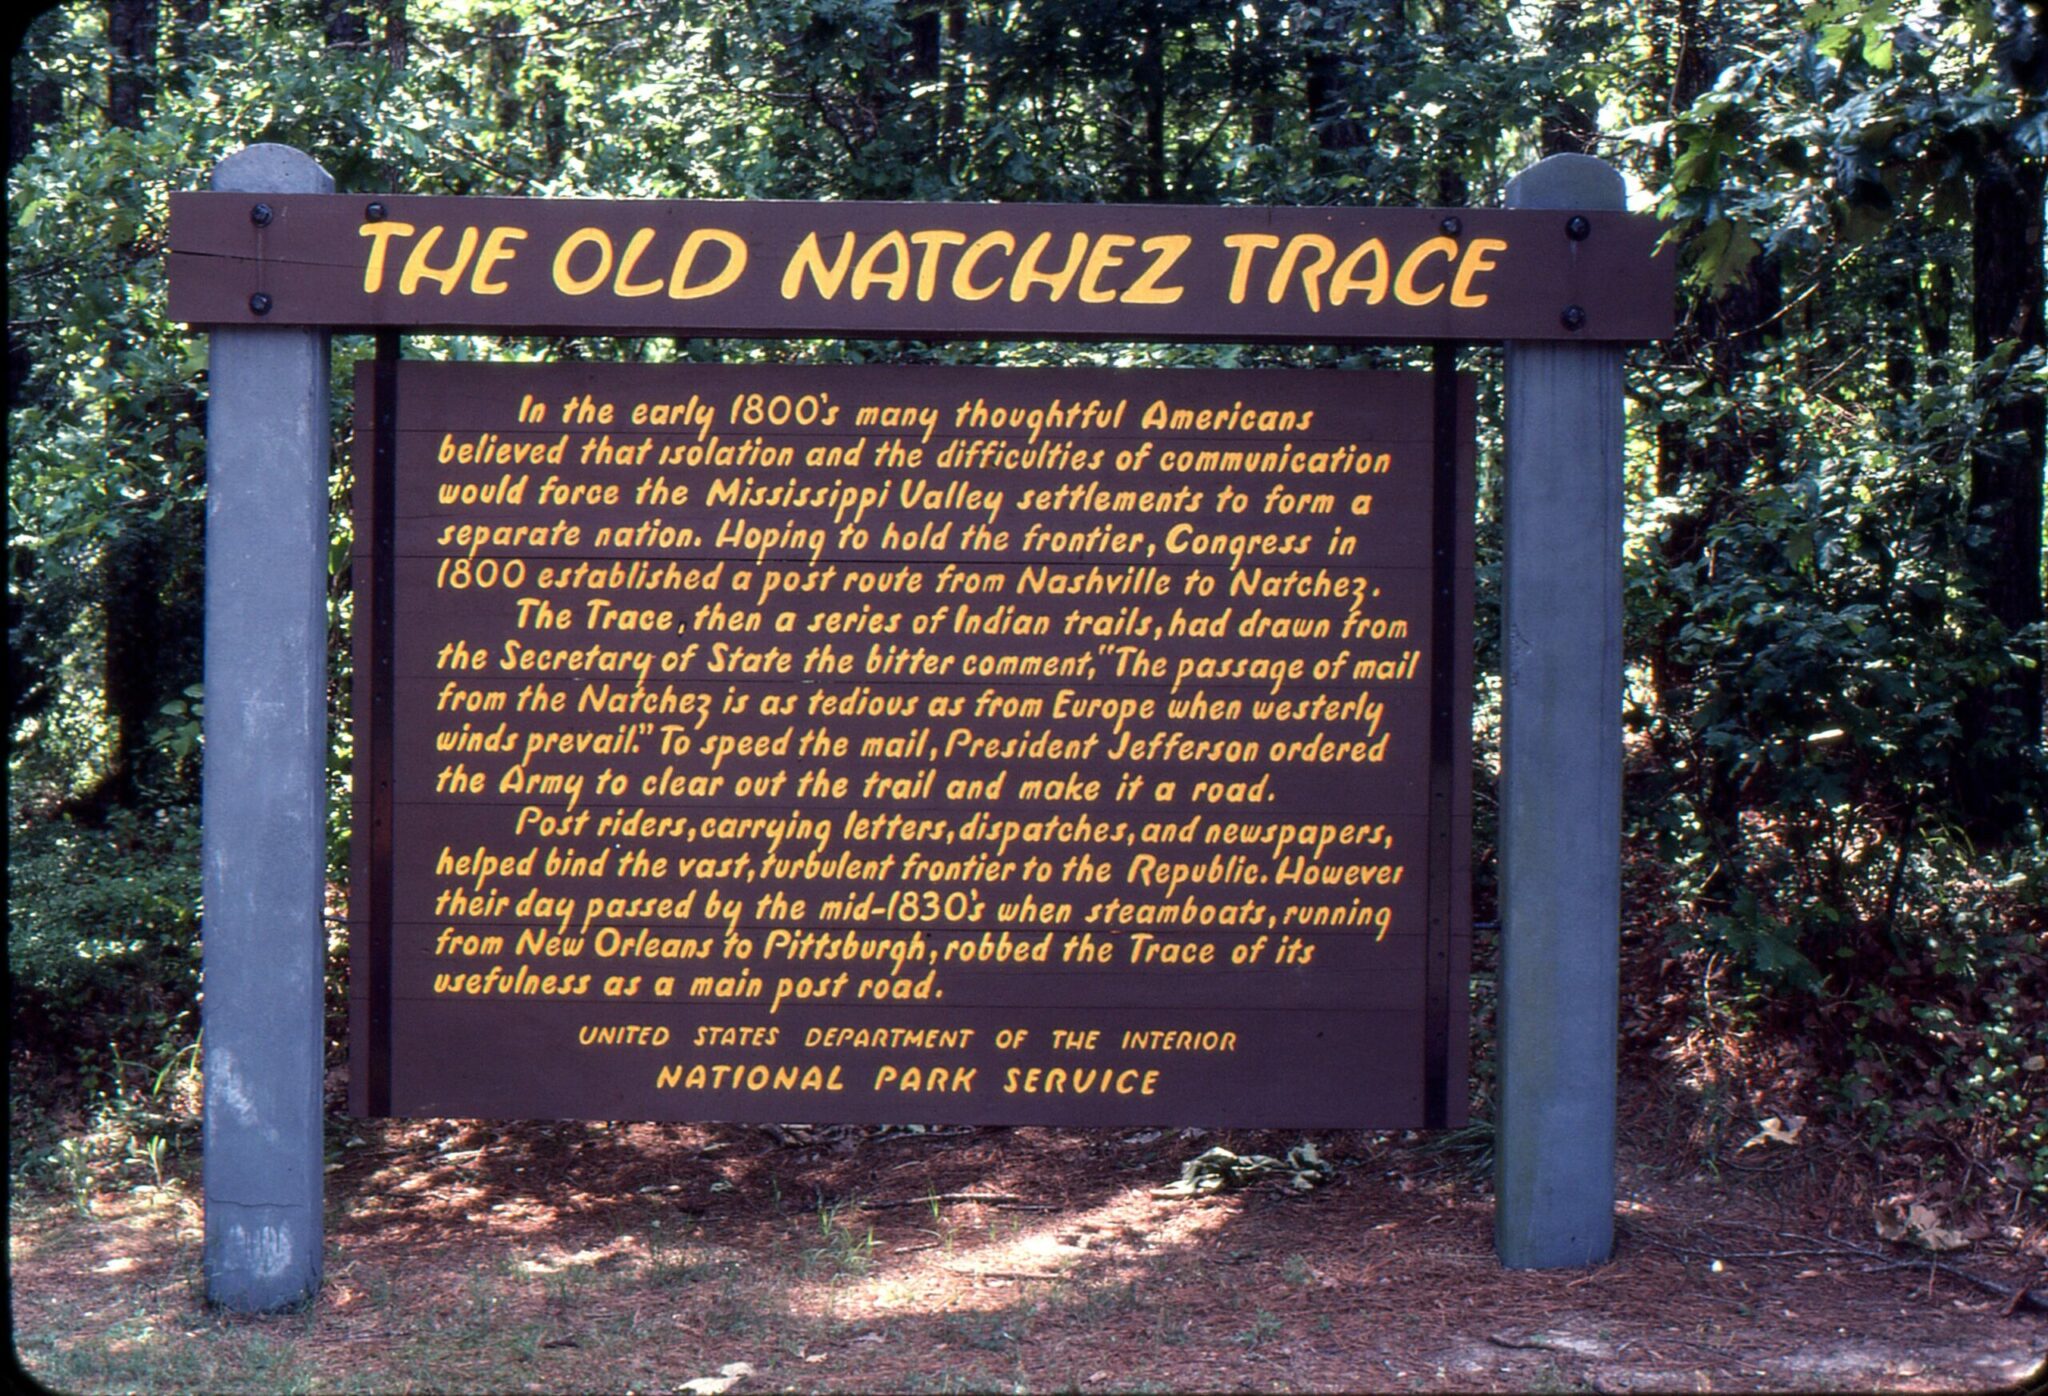 who built the emerald mound along the natchez trace parkway in mississippi scaled